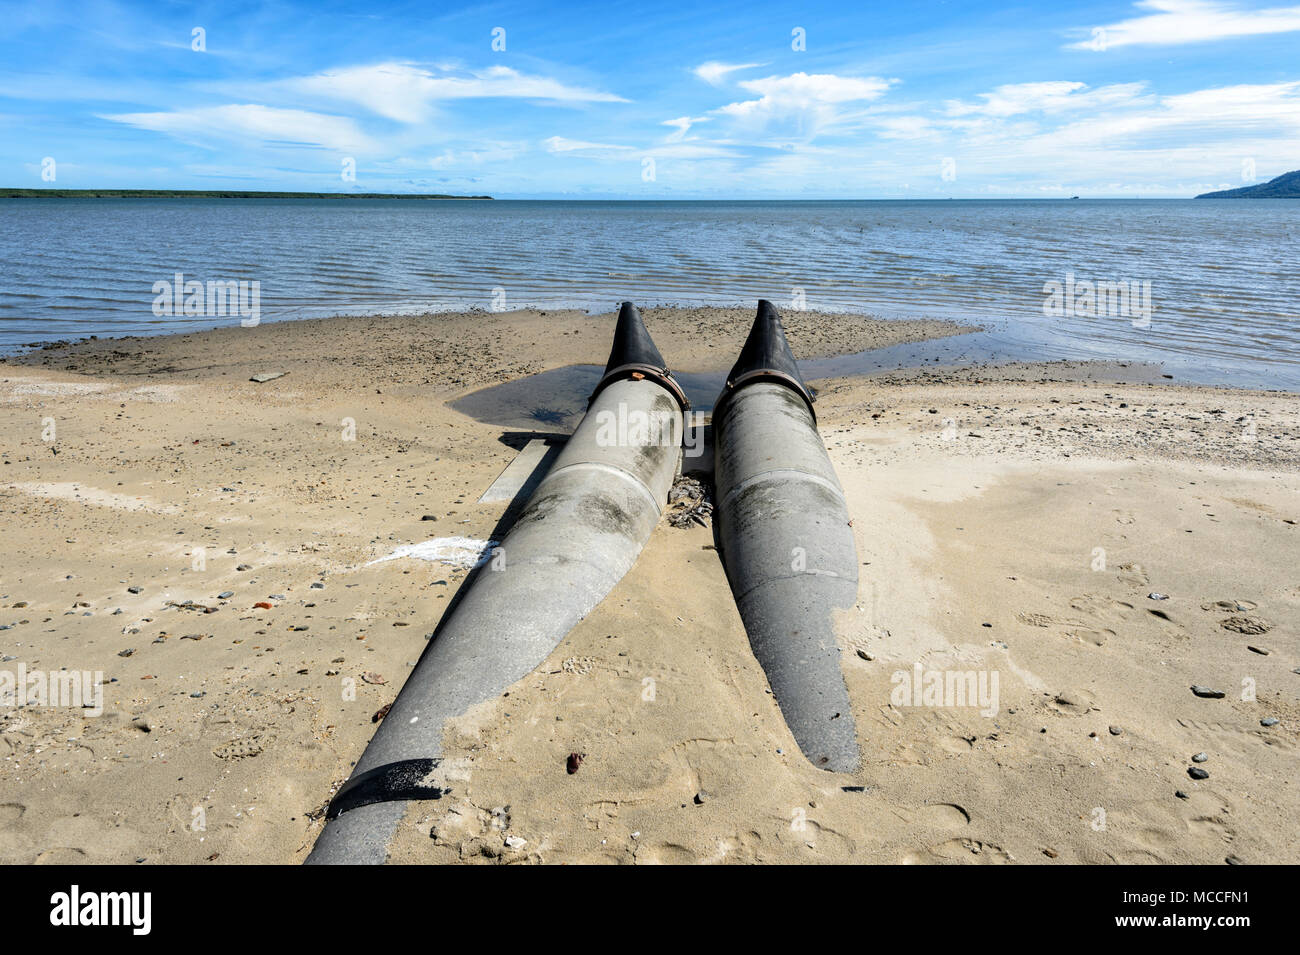 Drains for storm water discharge on Cairns beach, Far North Queensland, FNQ, QLD, Australia Stock Photo